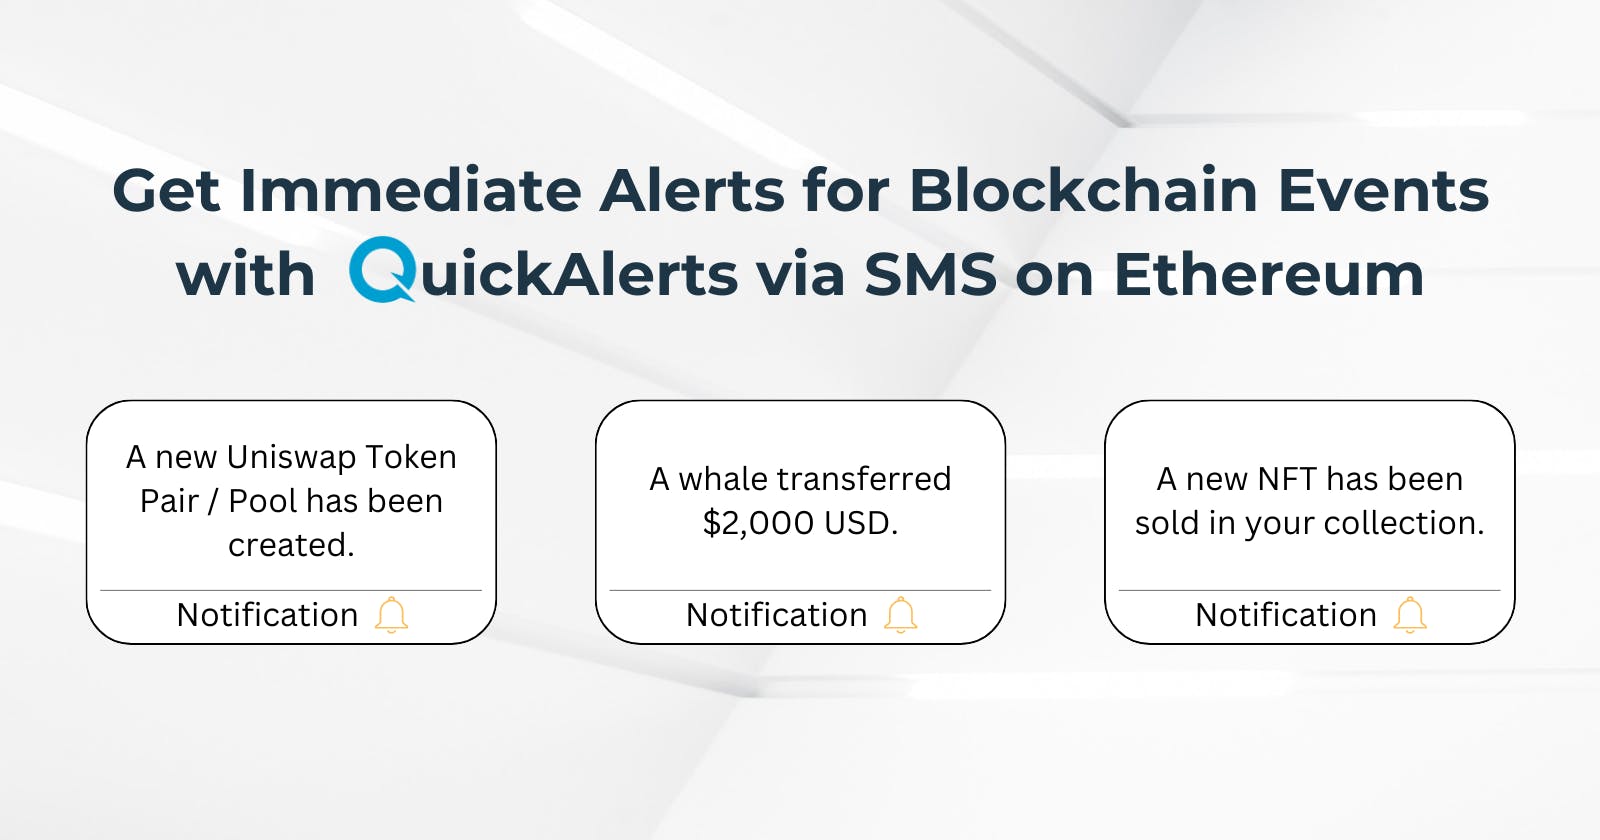 Get Immediate Alerts for Blockchain Events with QuickAlerts via SMS on Ethereum